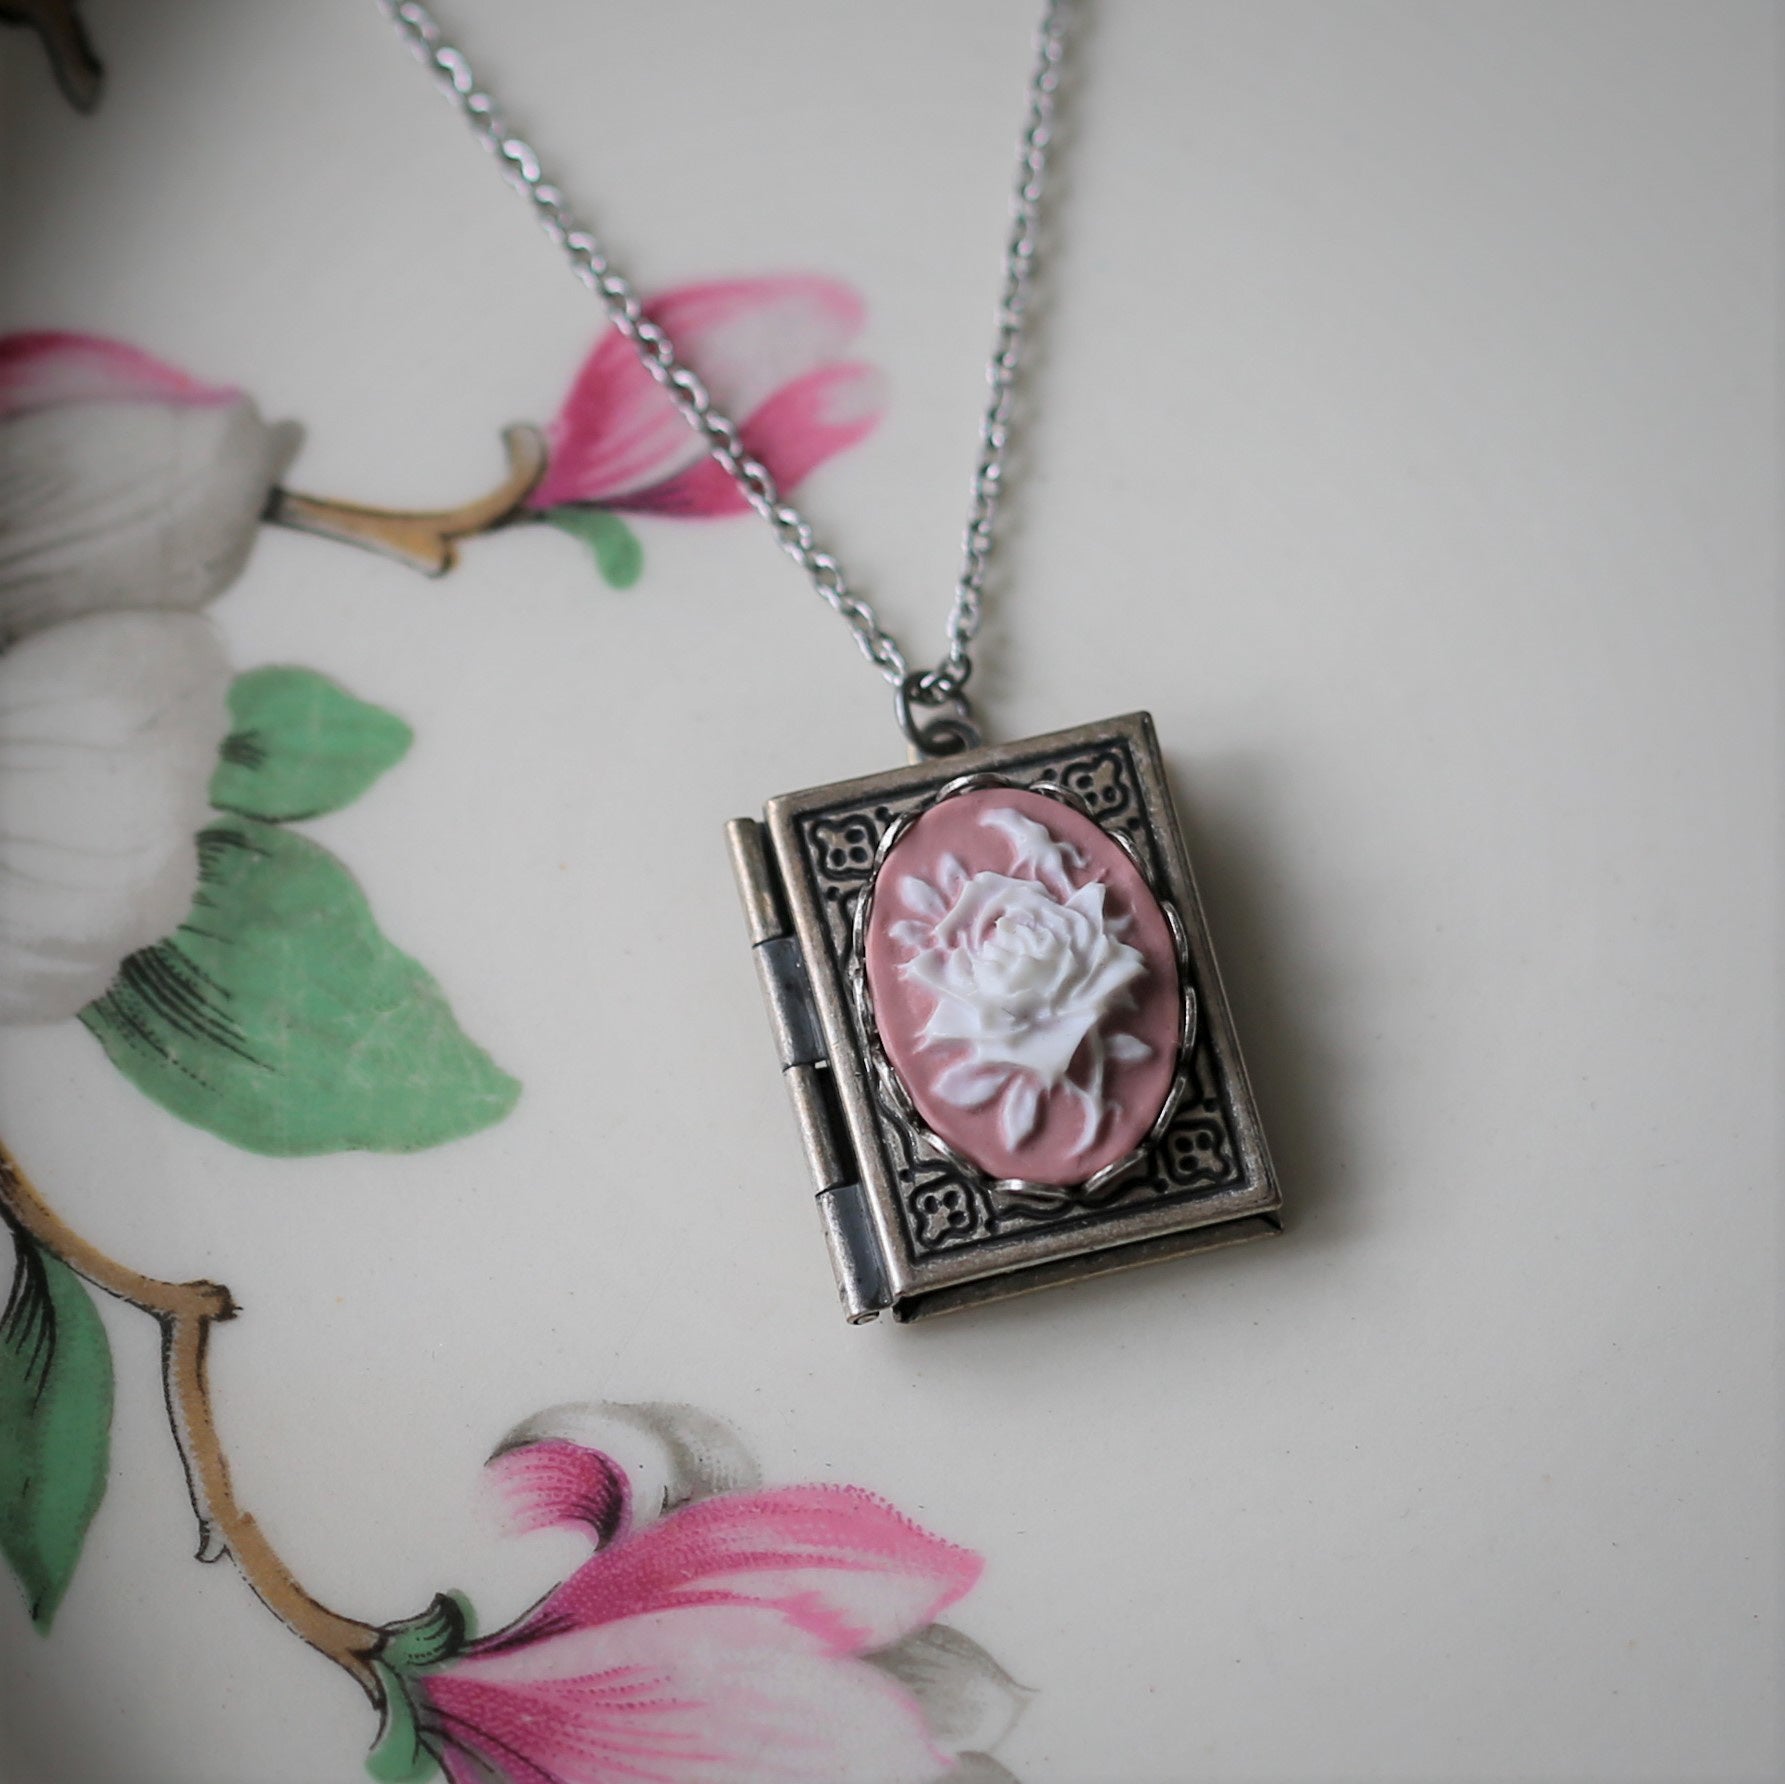 Antique Small Silver Locket with Rose on Chain - Hallmarked 1903